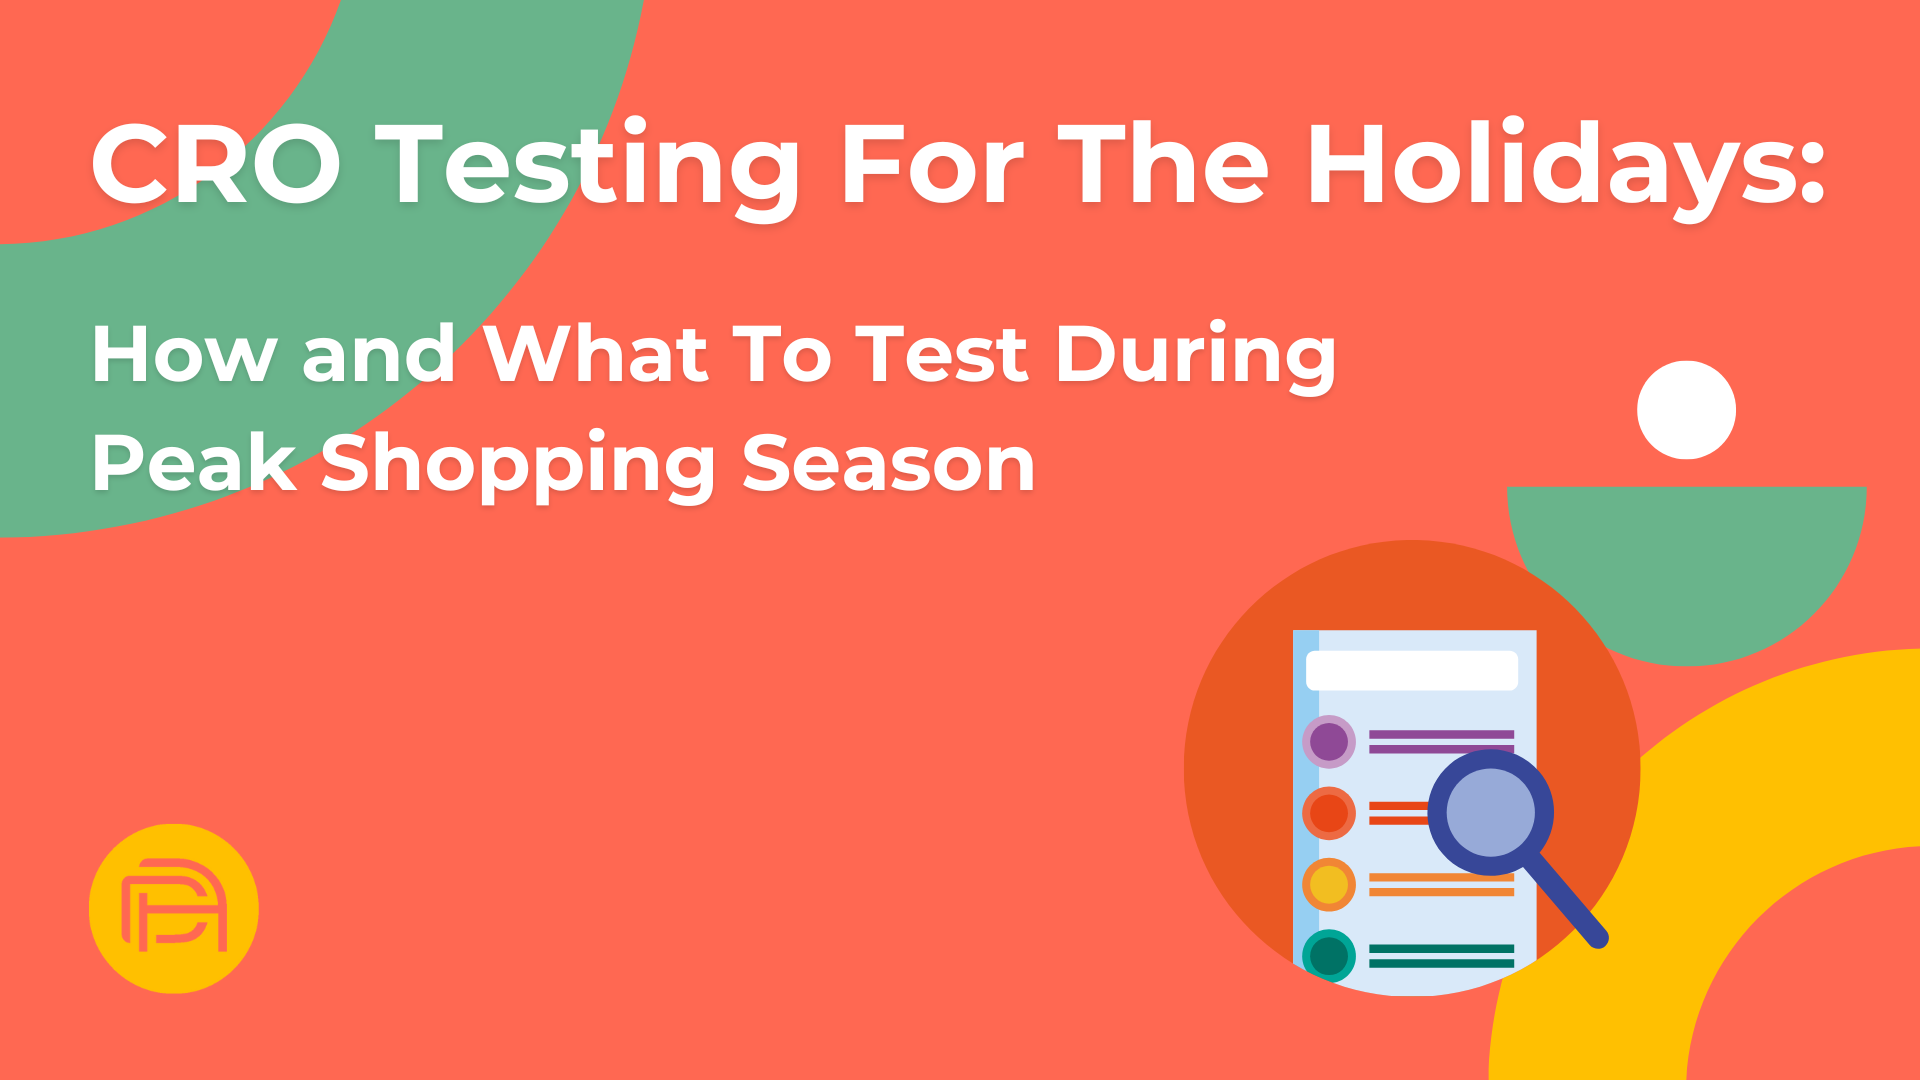 CRO Testing For The Holidays: How and What To Test During Peak Shopping Season